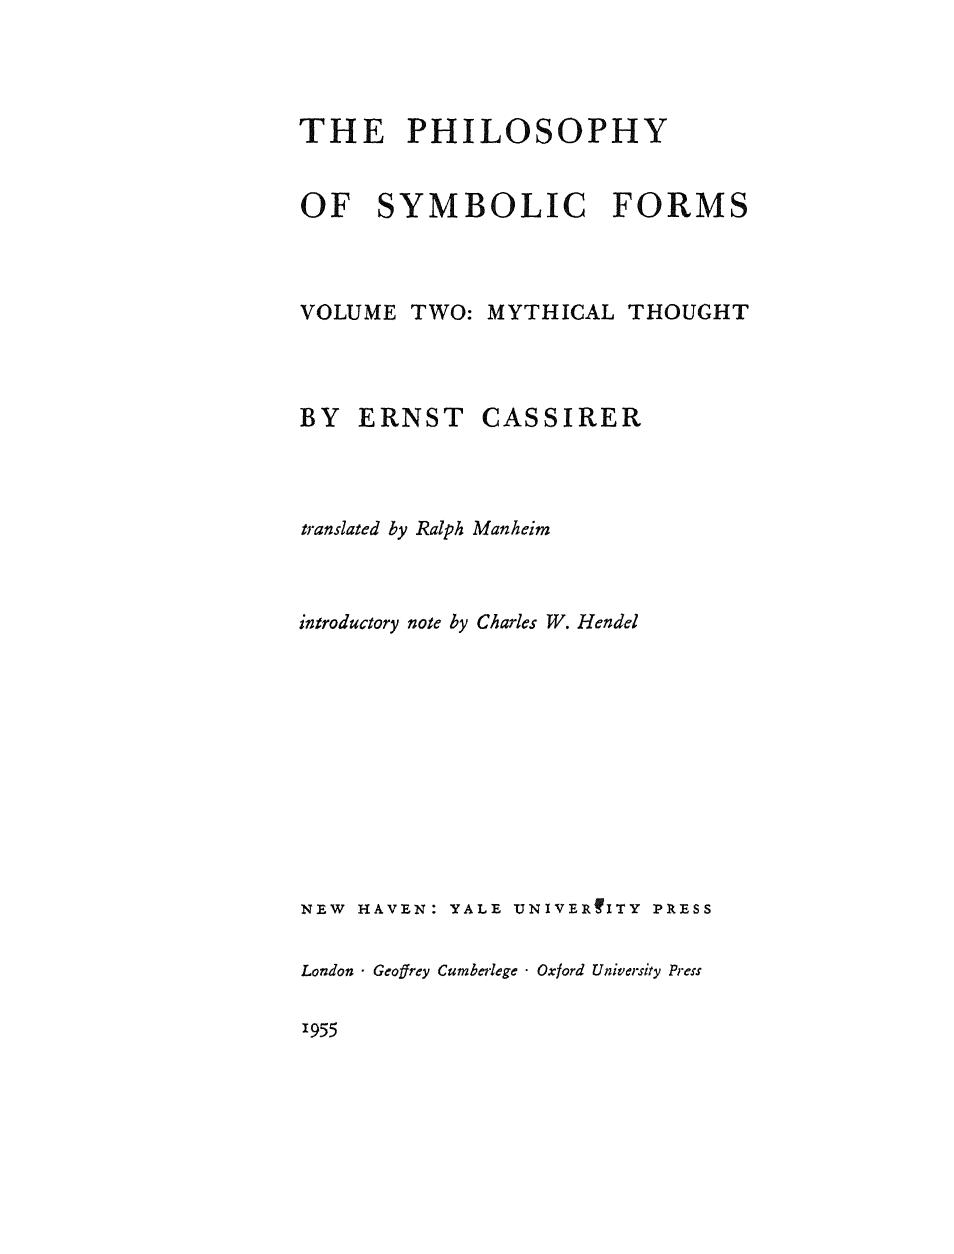 The Philosophy of Symbolic Forms - Volume 2 - Mythical Thought